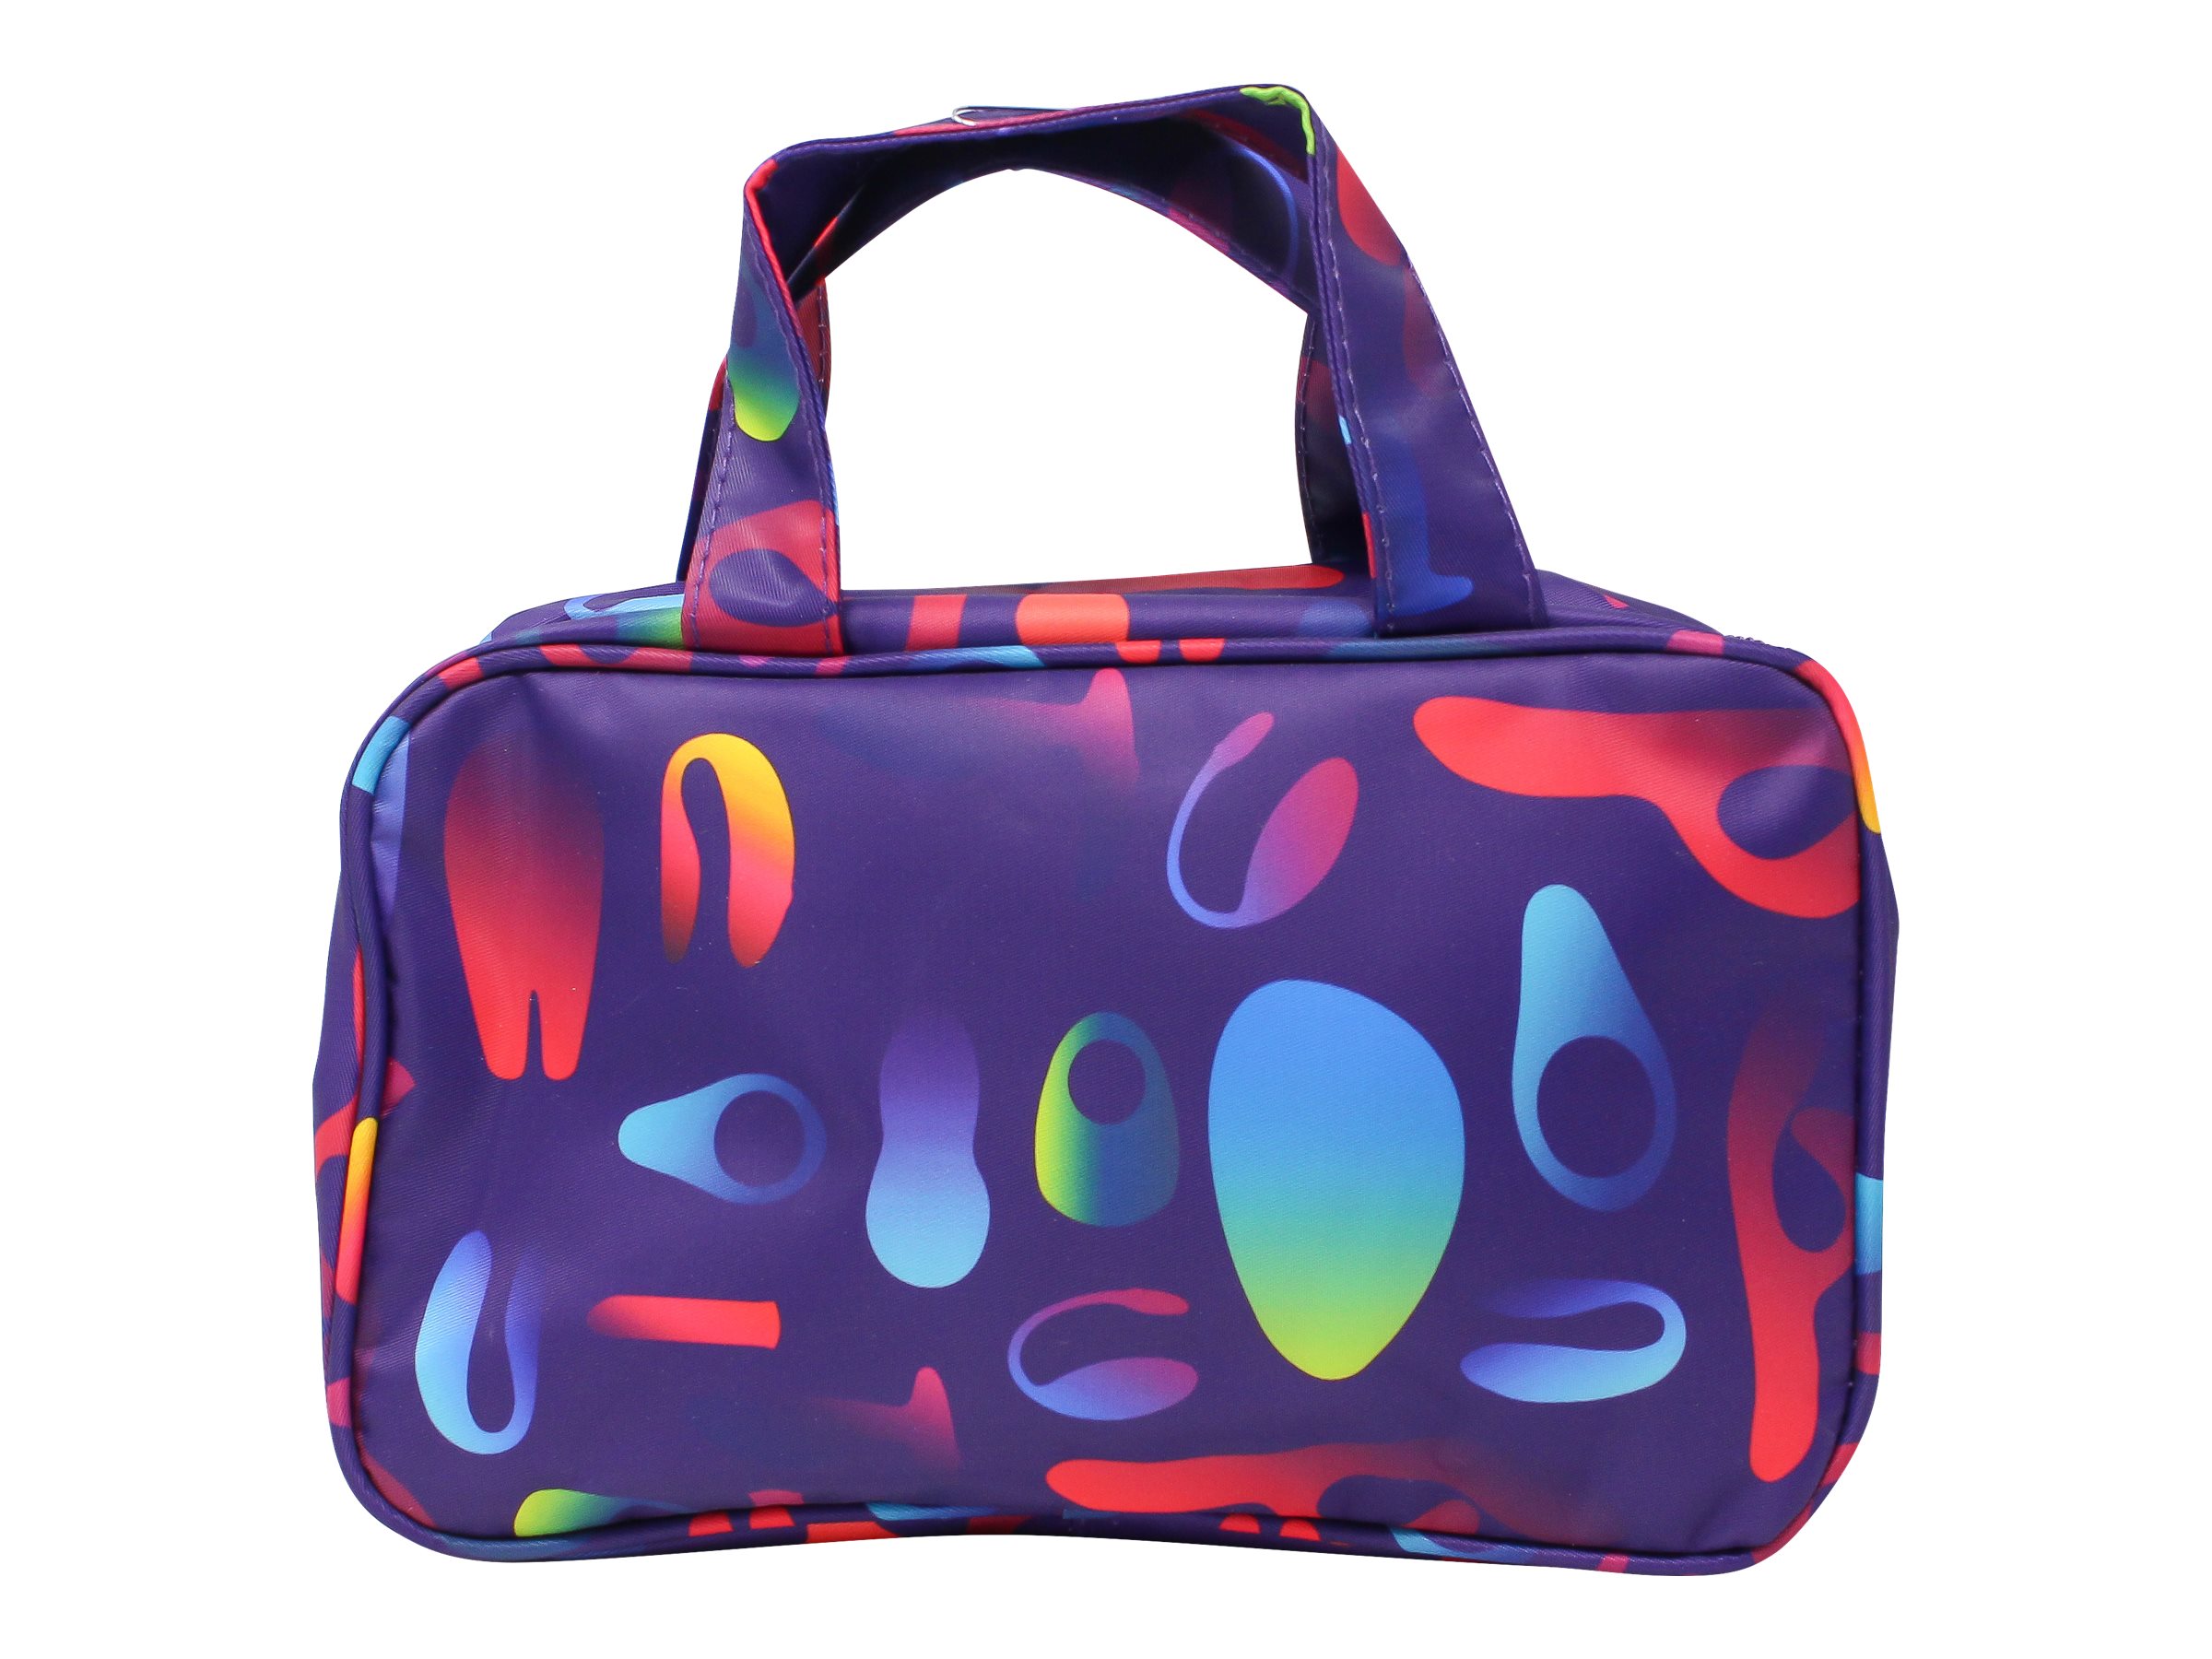 We-Vibe Carrying Bag - 91062